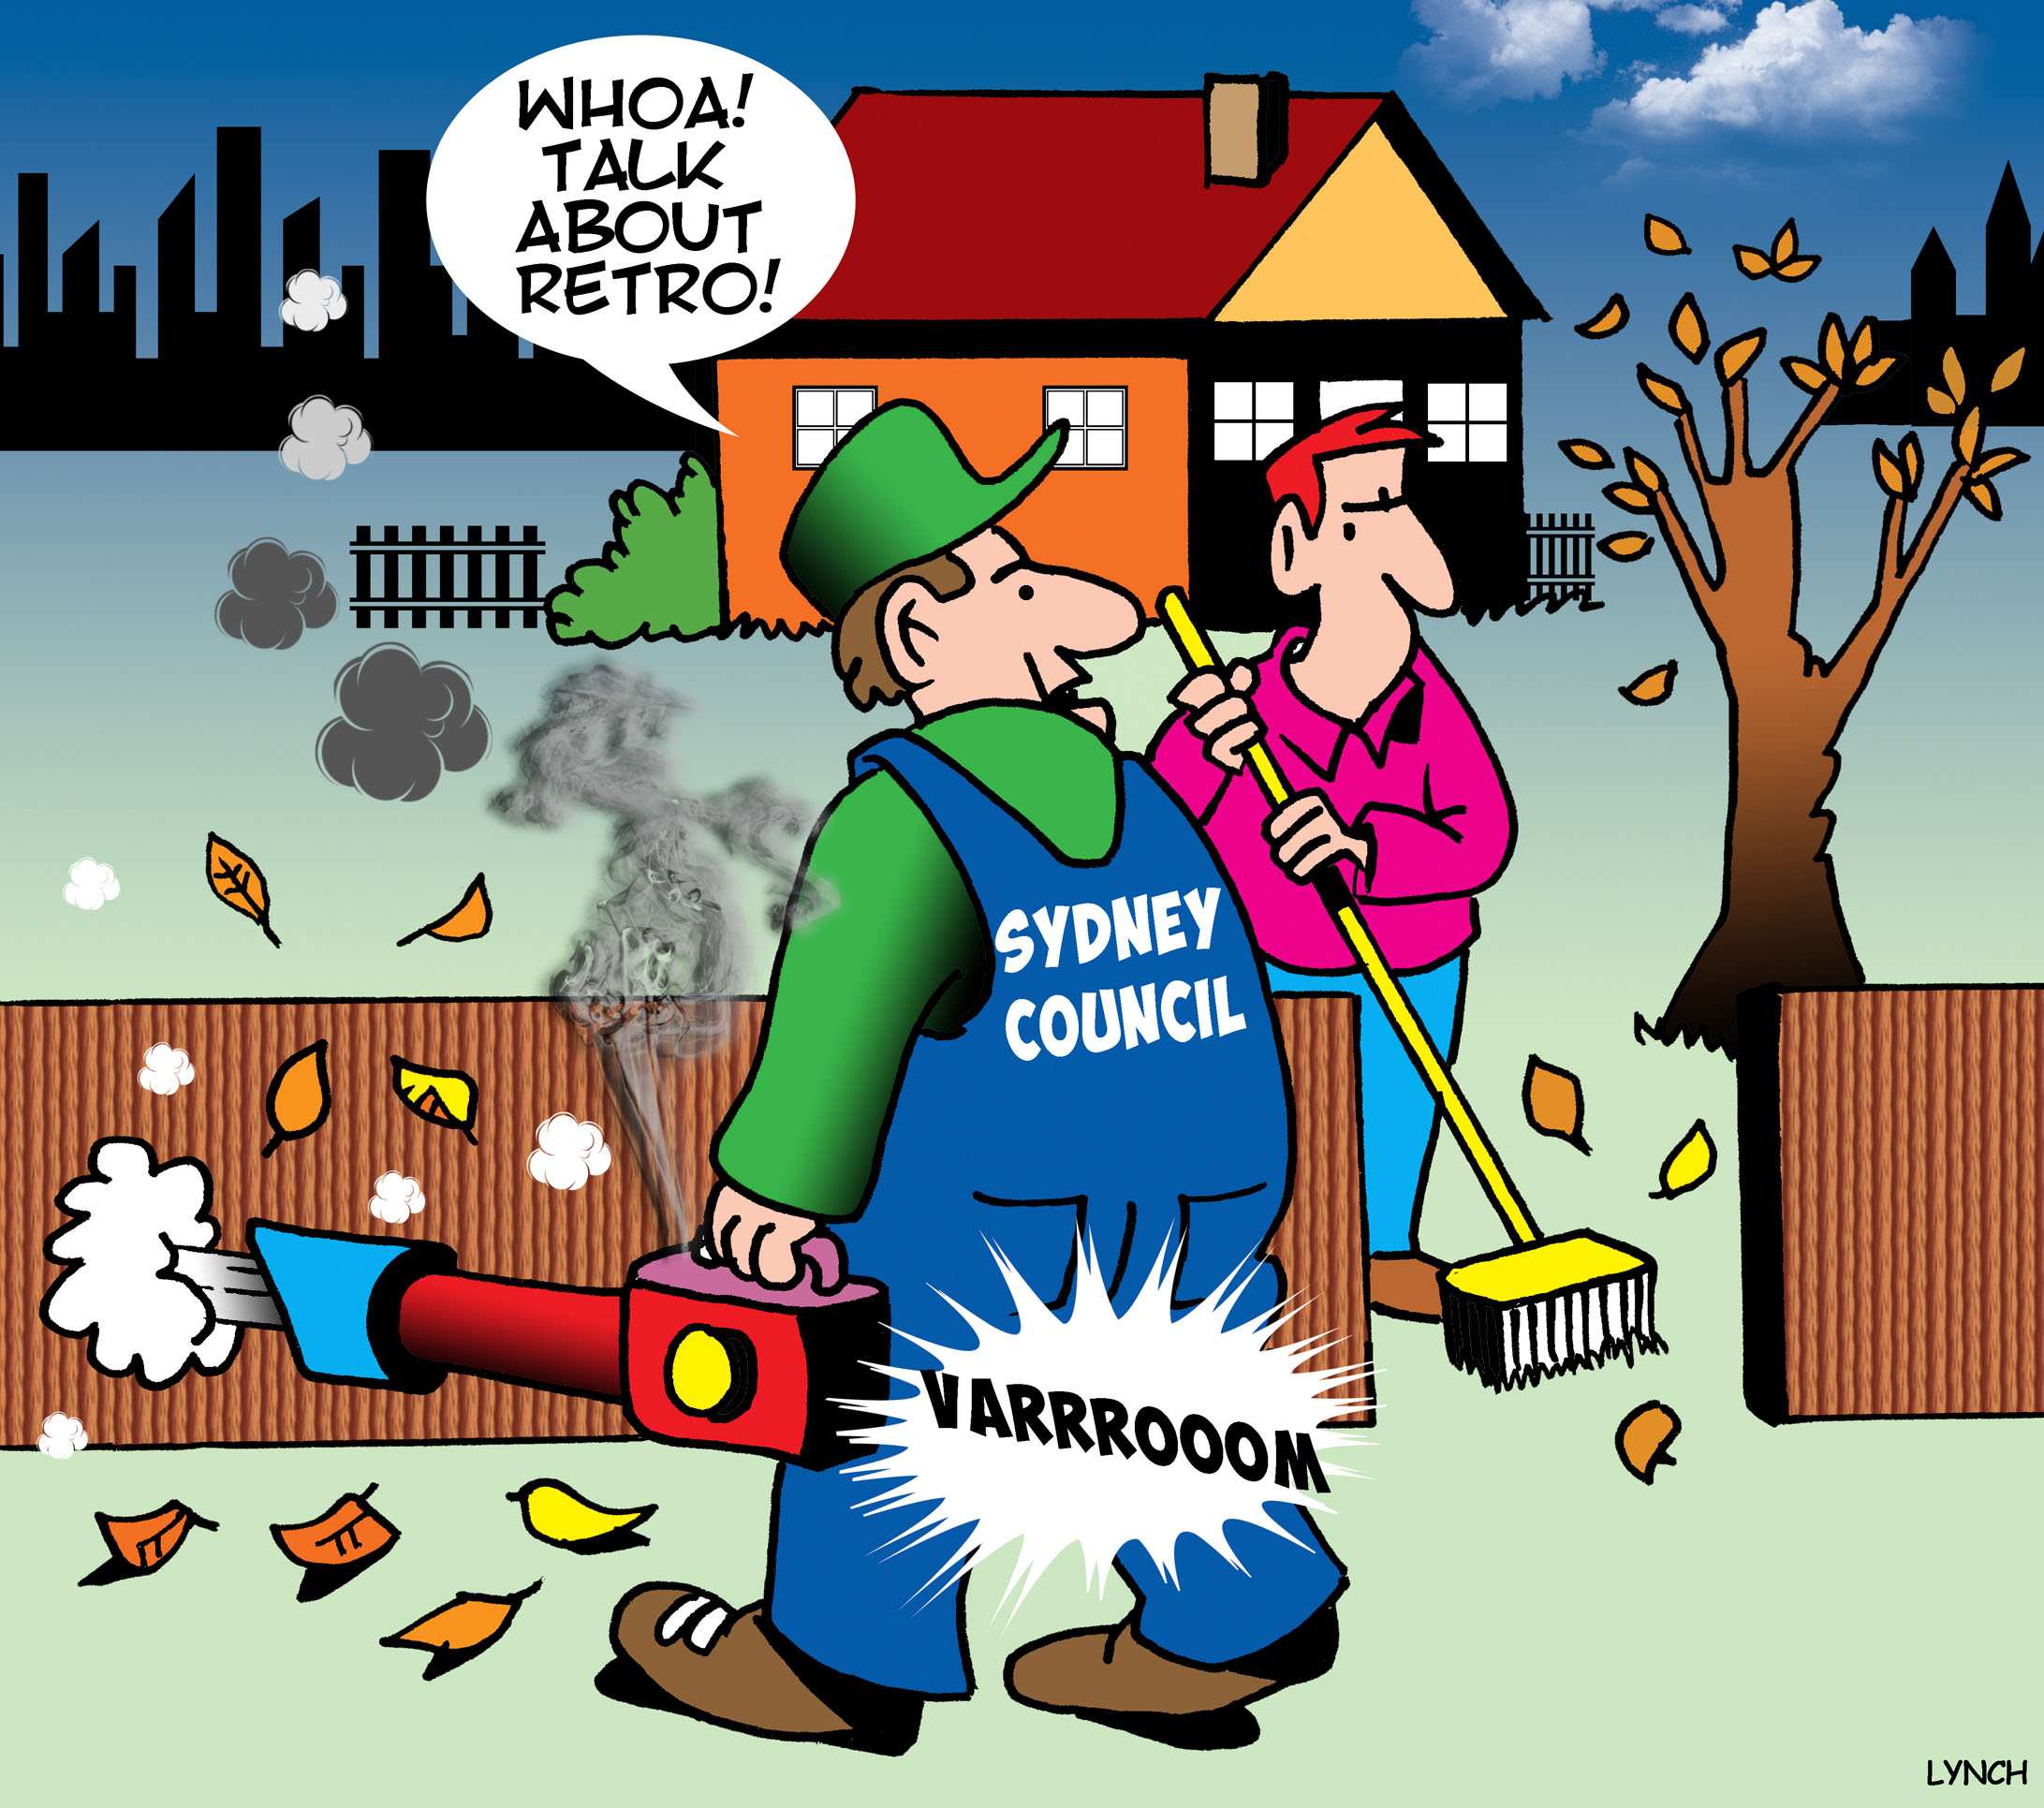 Blowing hot air : leaf blowers are the new urban evil